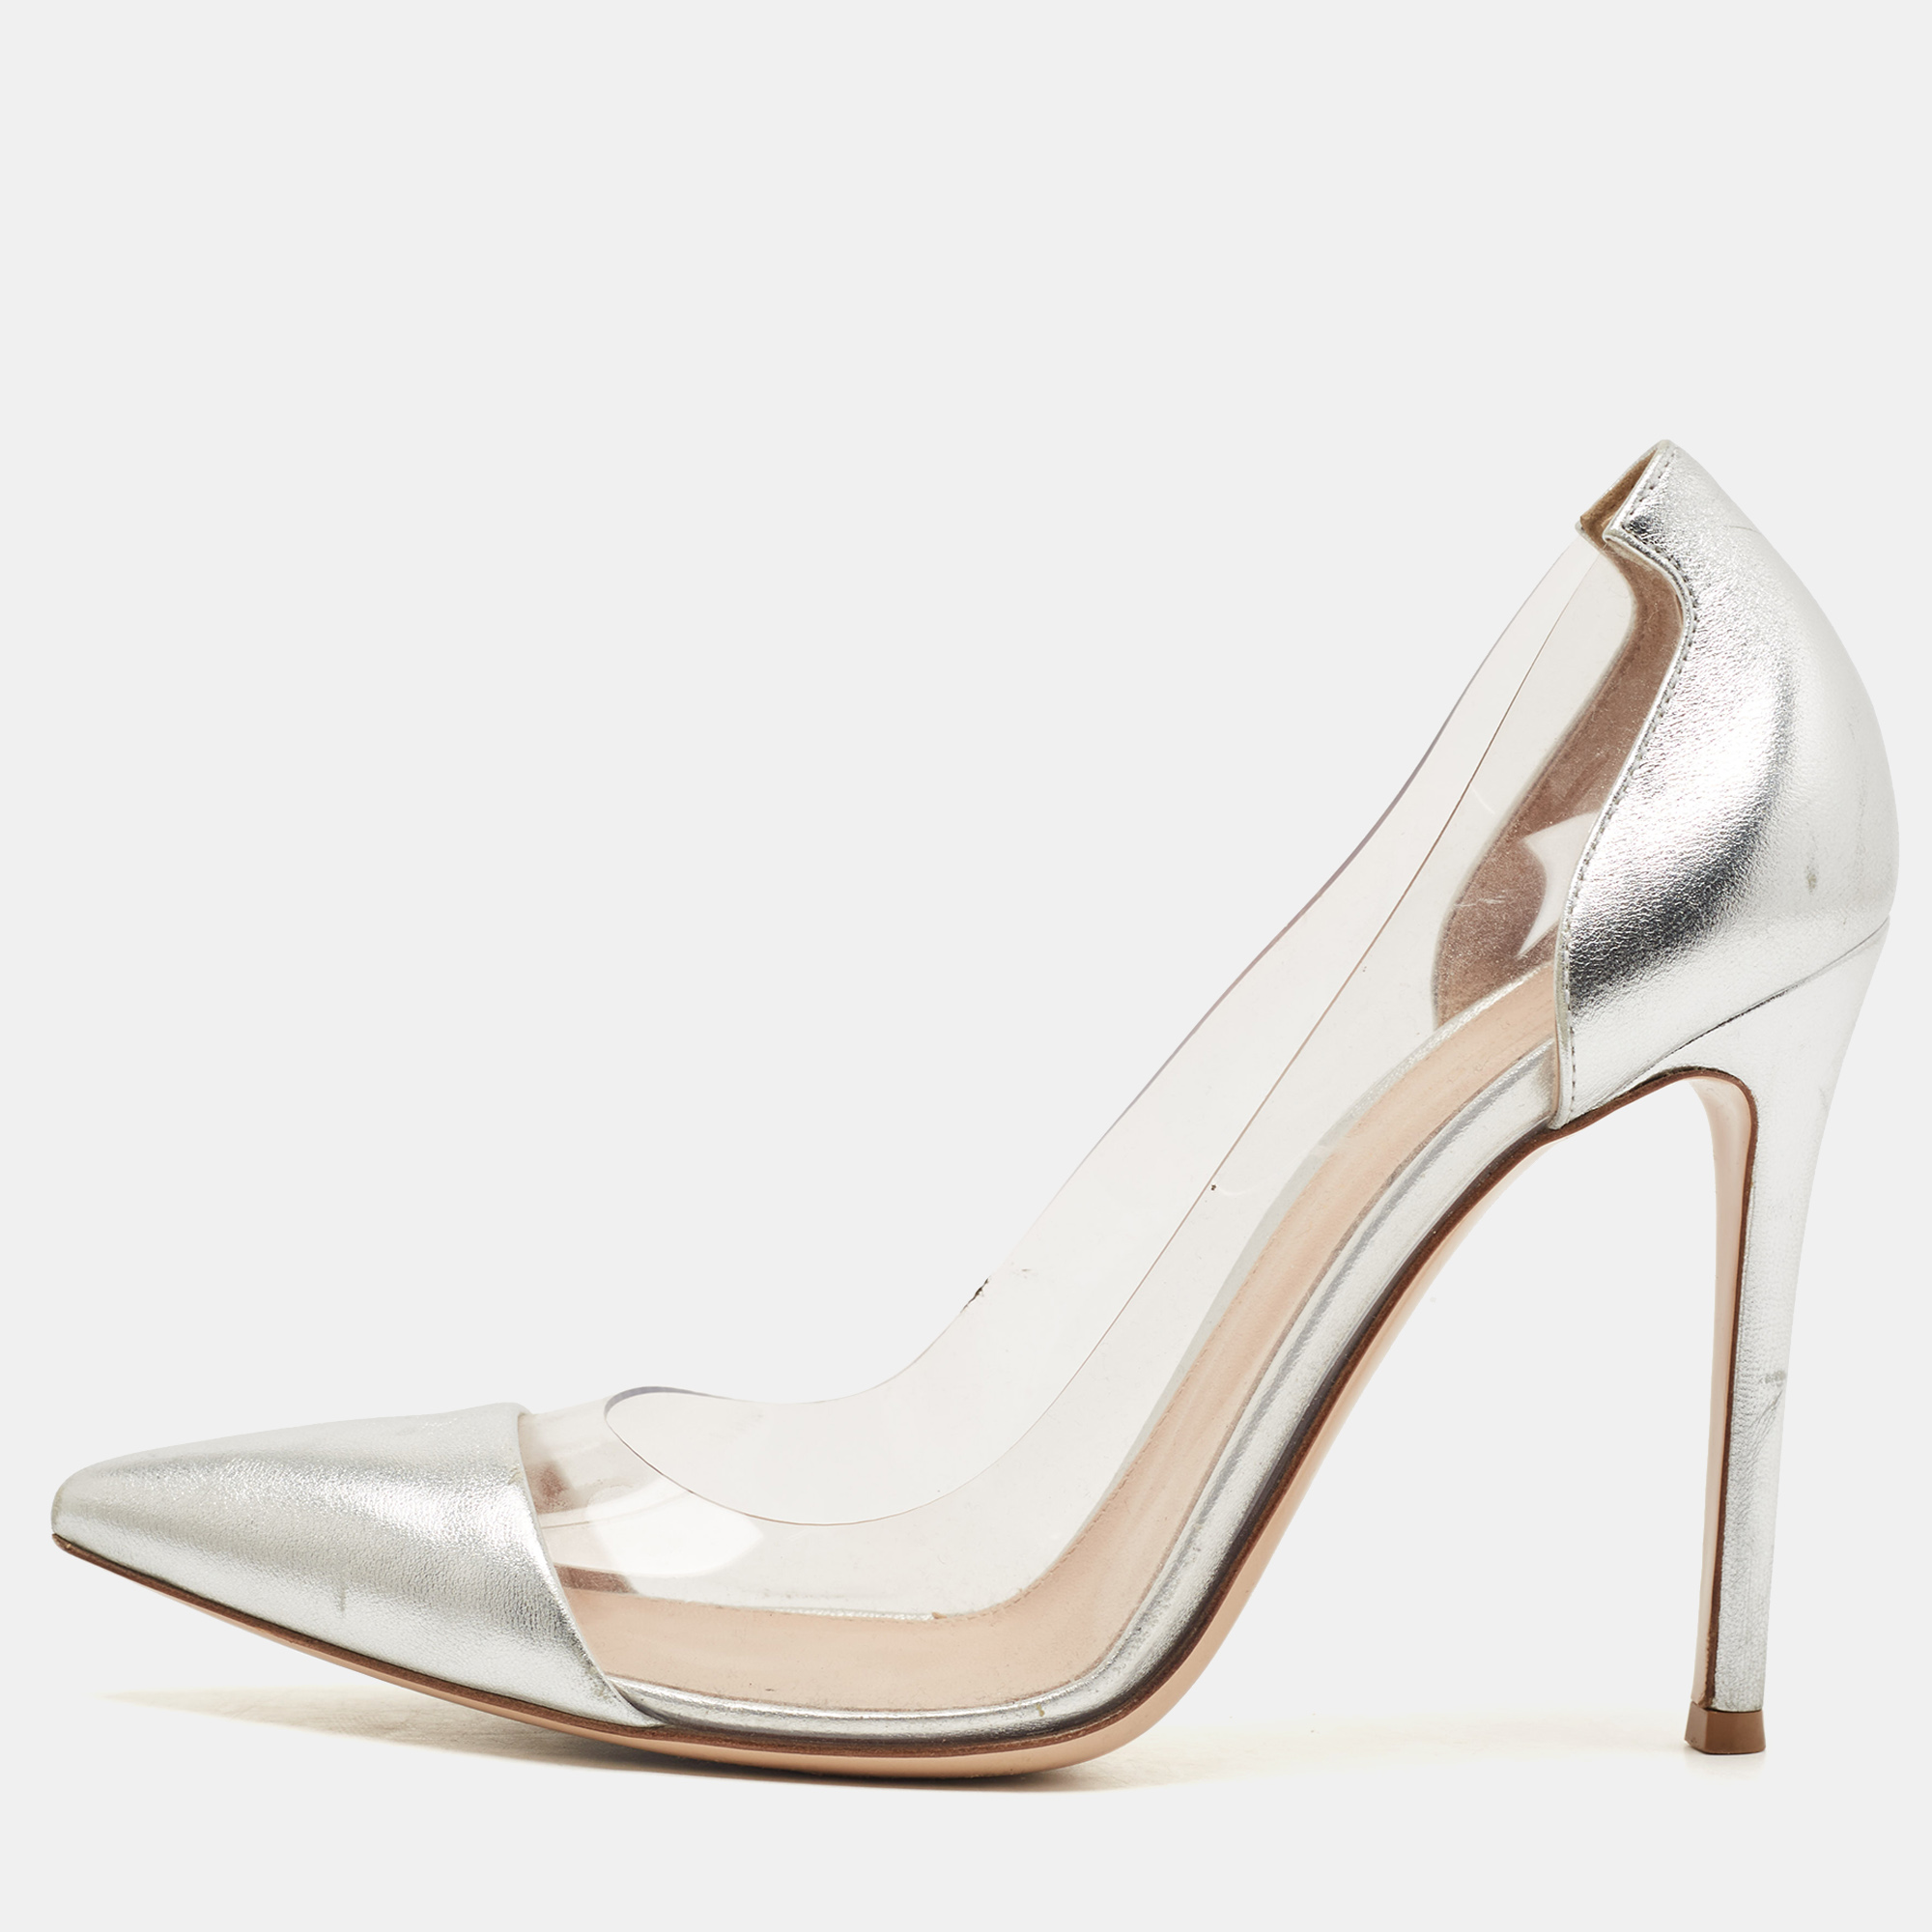 Gianvito rossi silver leather and pvc plexi pointed toe pumps size 38